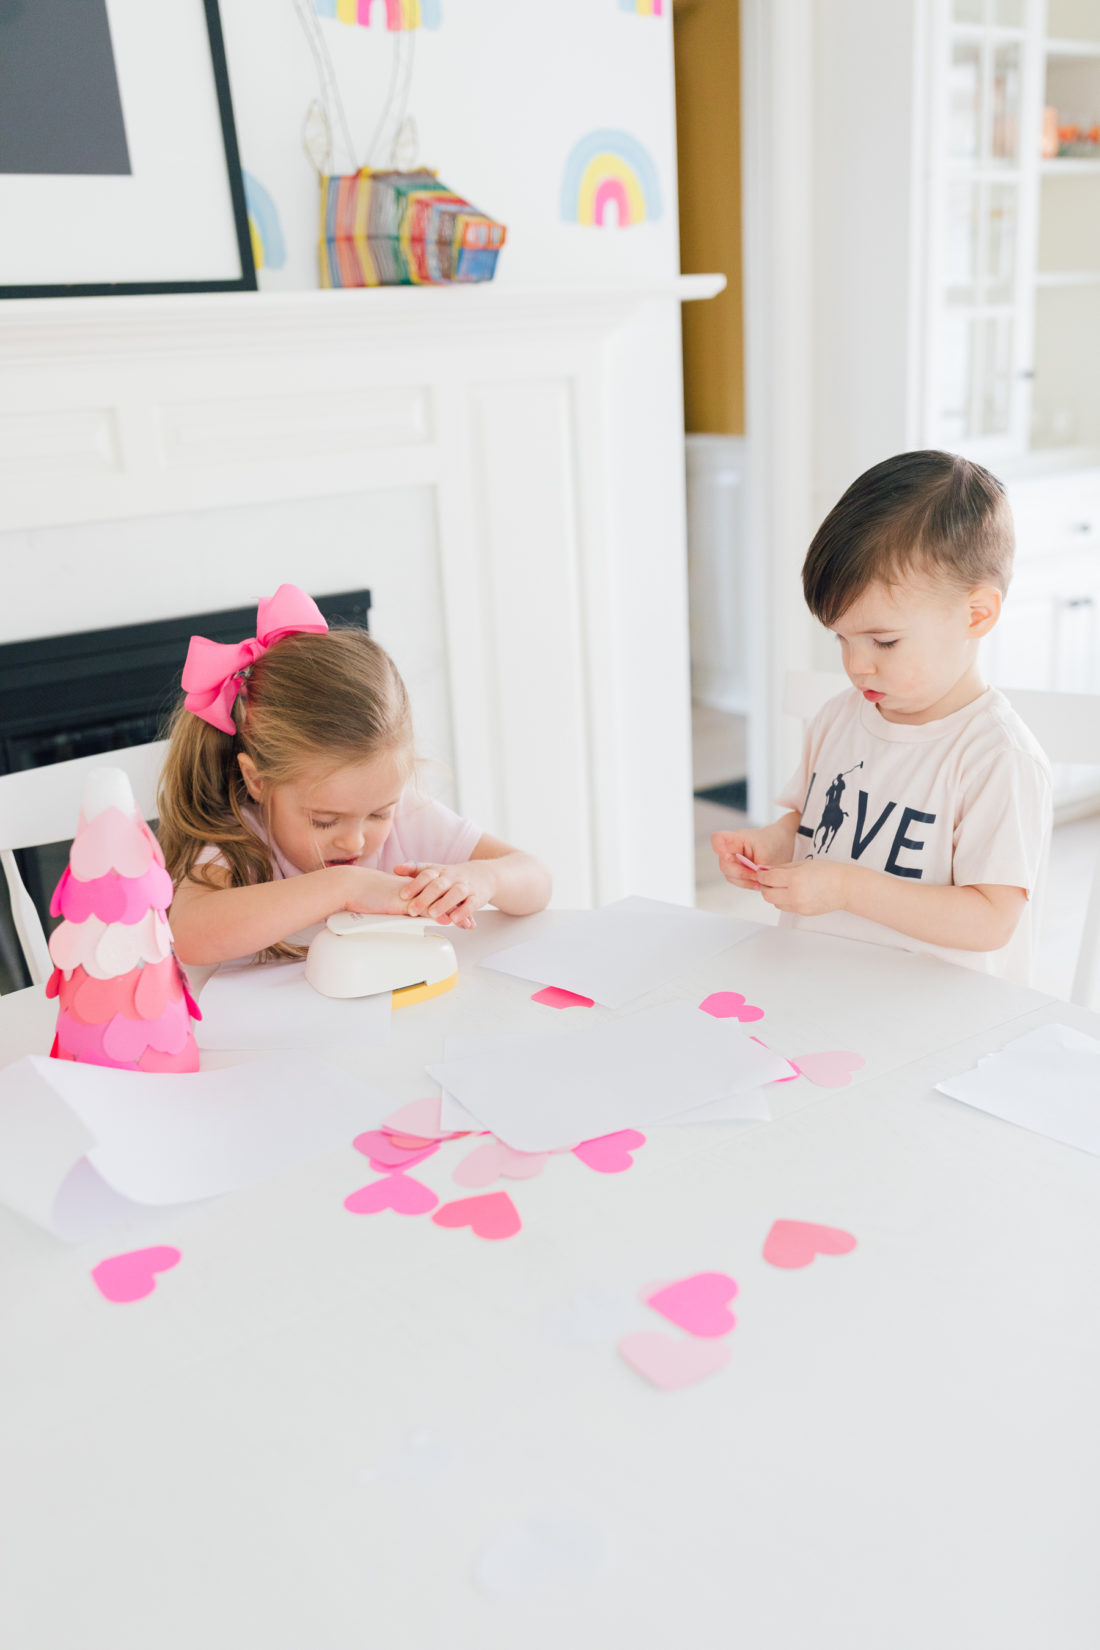 Marlowe and Major martino wear shades of pink and use a large heart hole punch to make materials for a Valentine's Day craft